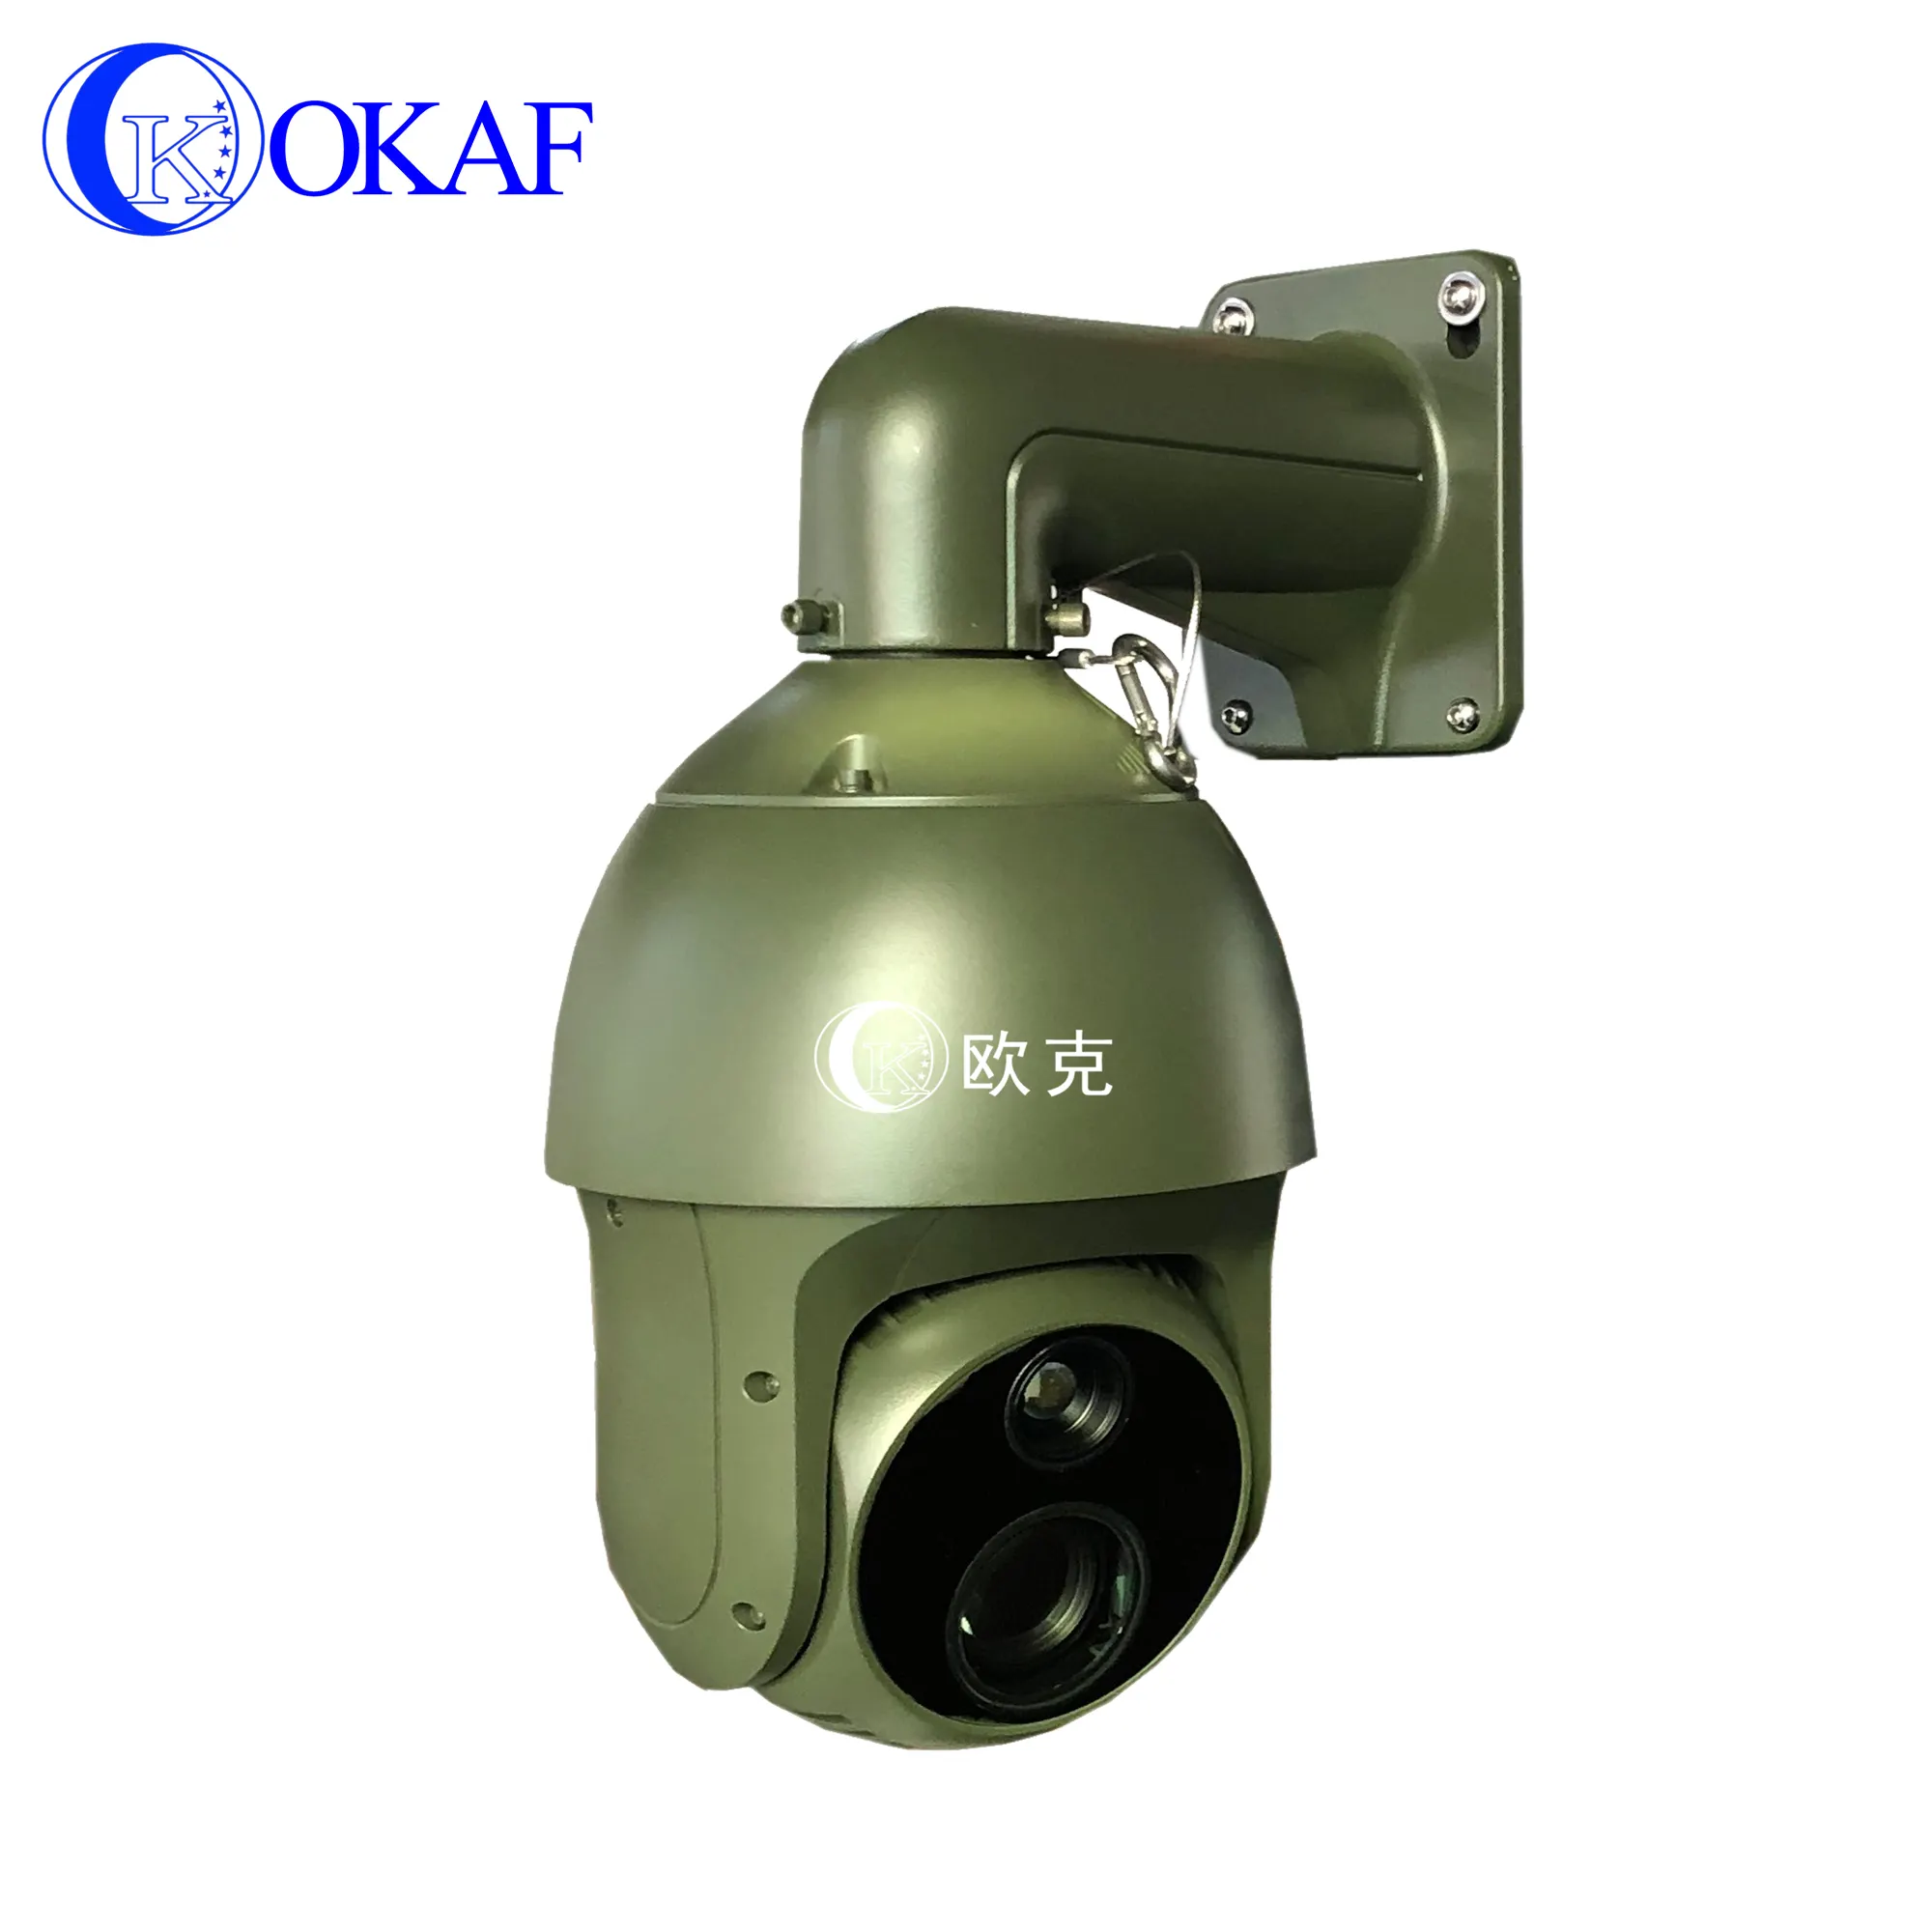 Thermal Imaging Dual-spectral Network Dome Camera Infrared Long Range High Definition Night Vision IP Camera